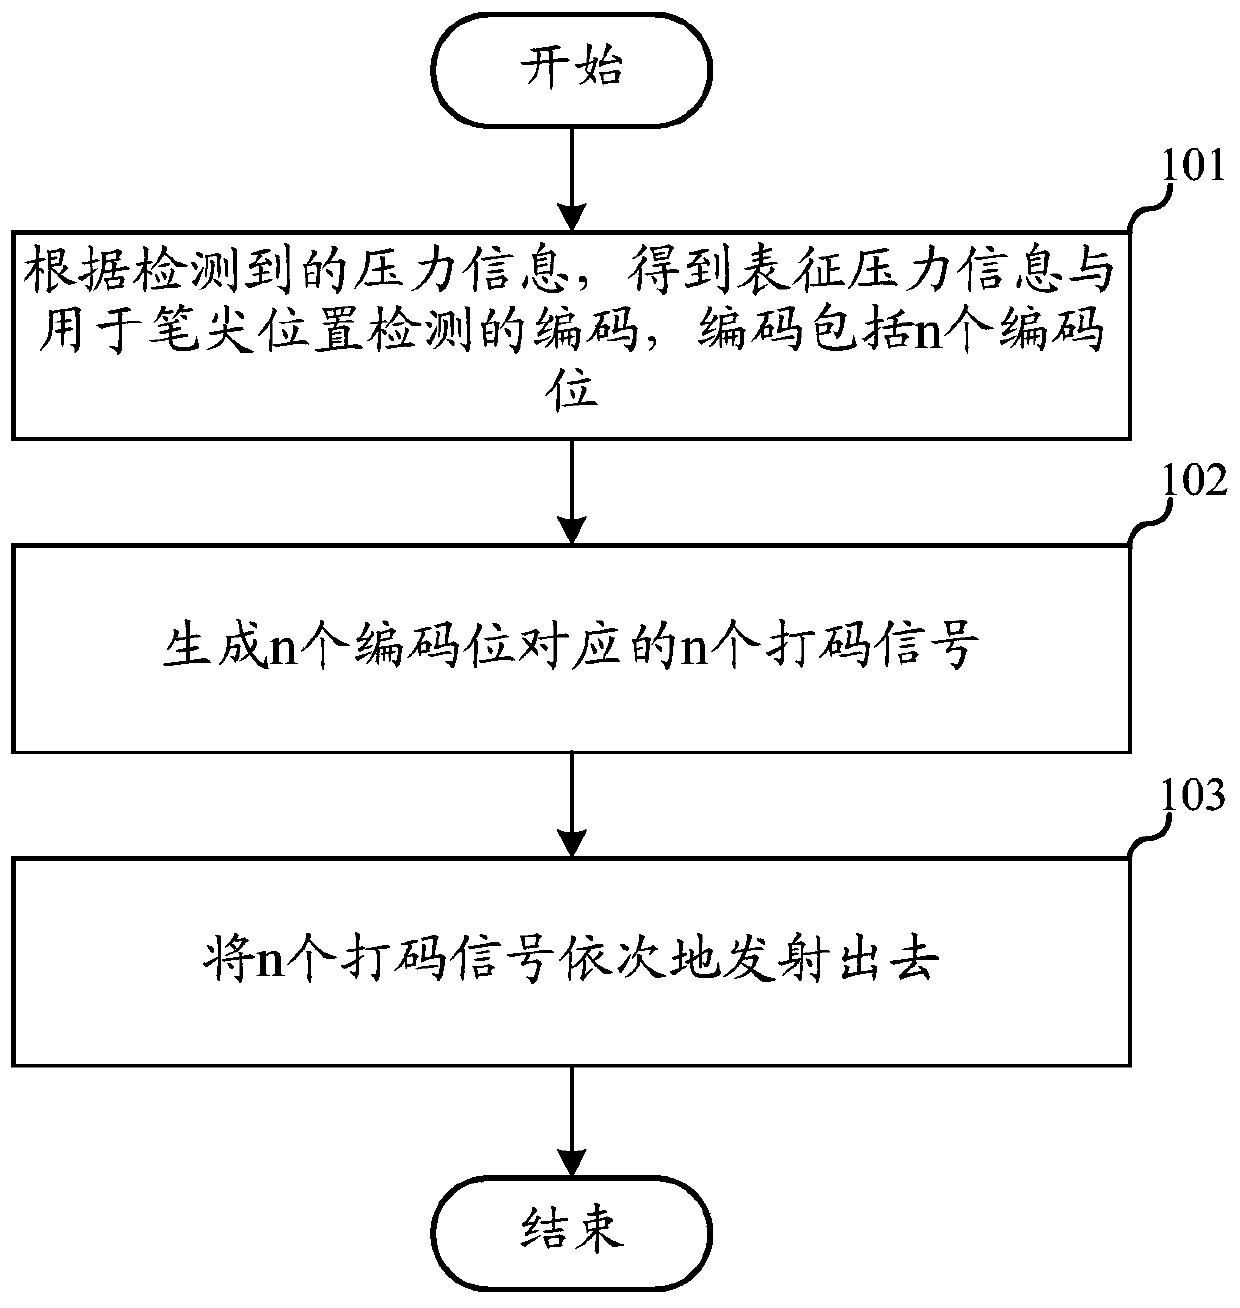 Signal transmitting and receiving method, processor chip, active pen, touch screen